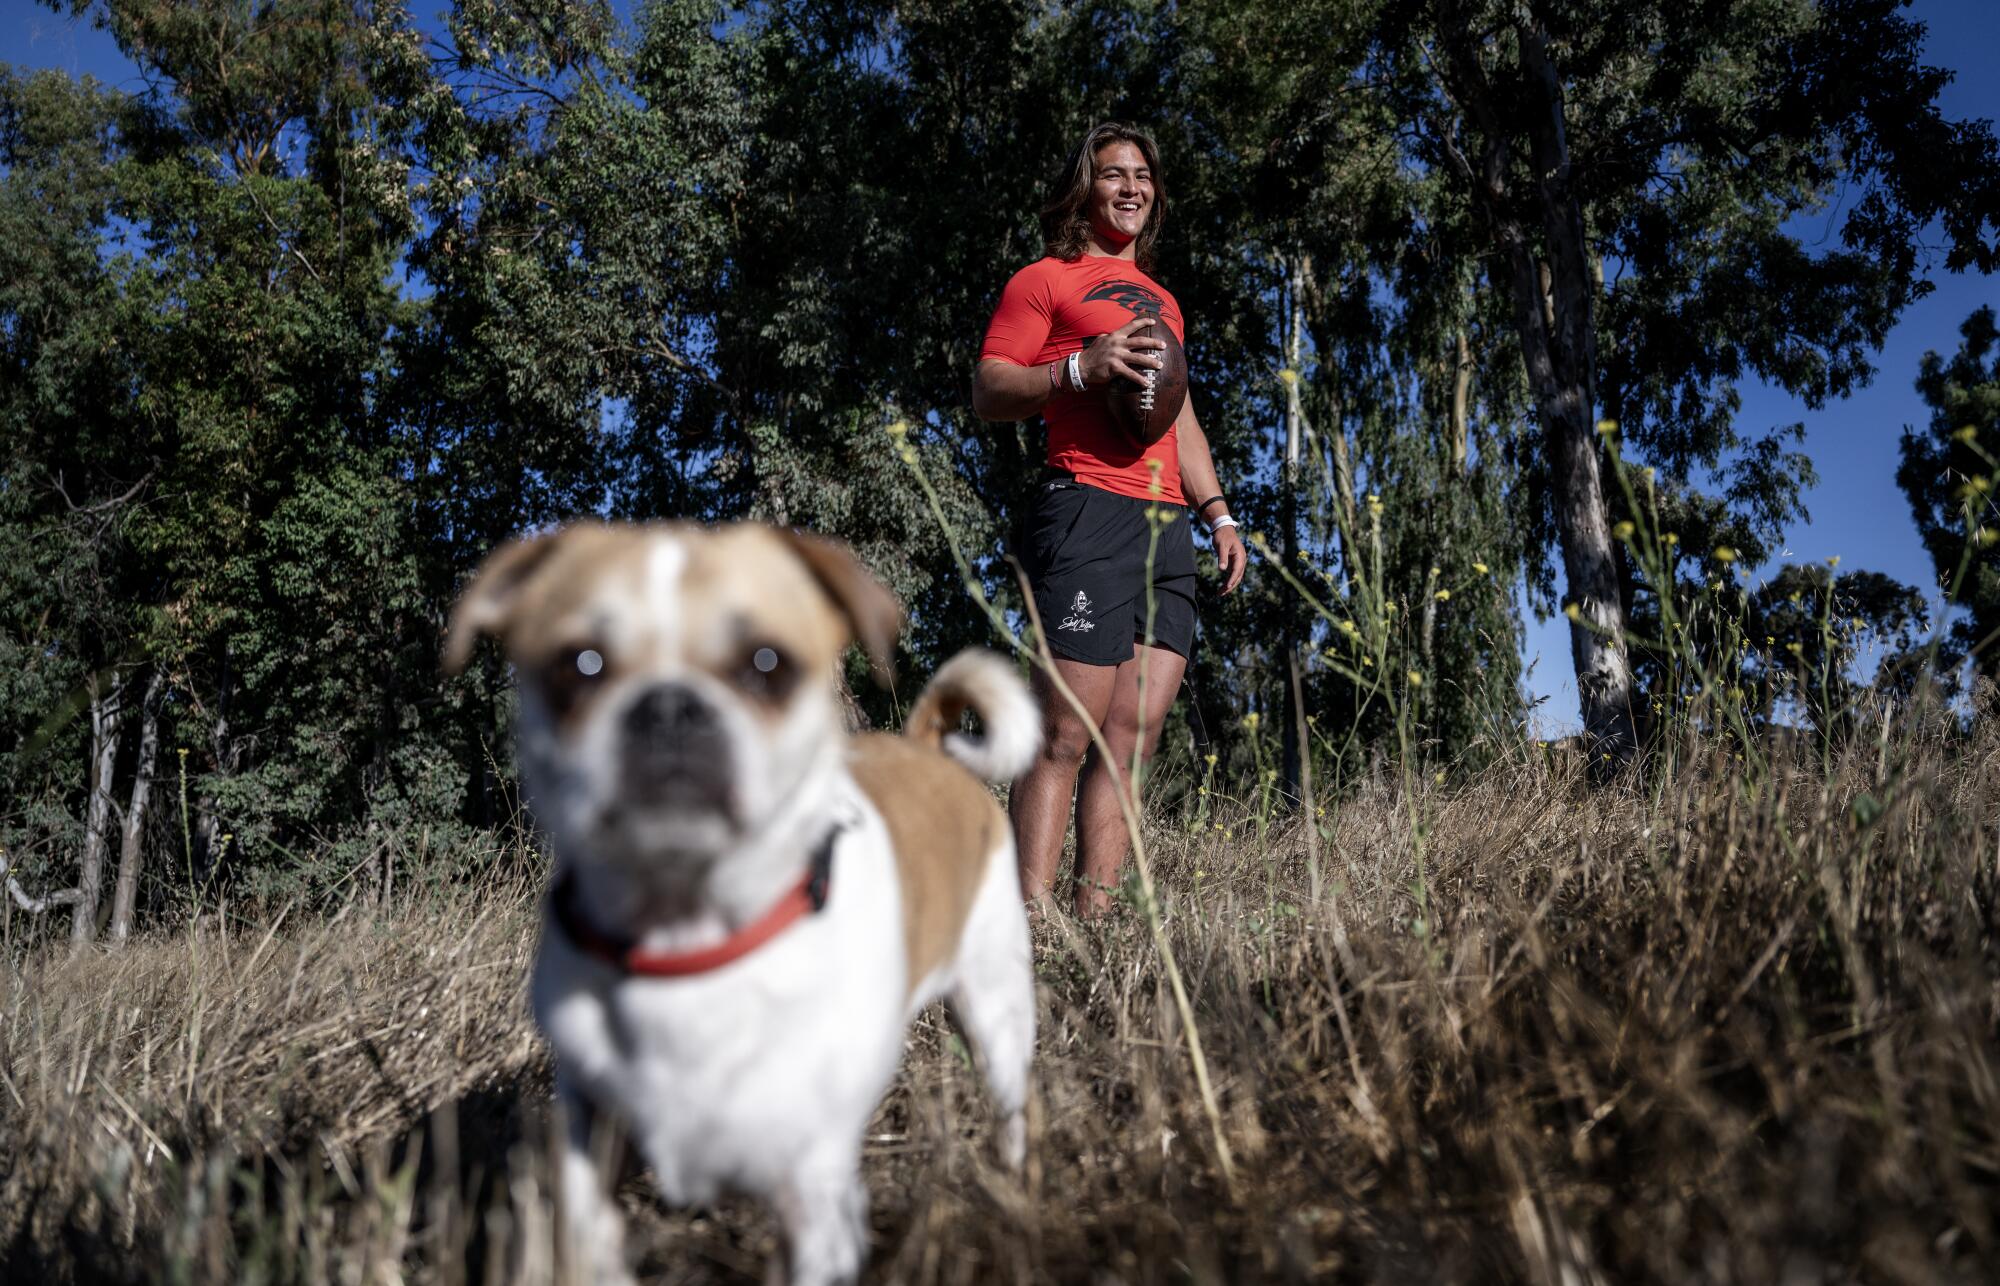 Murrieta Valley junior quarterback Bear Bachmeier with his dog in the rural landscape at his home.